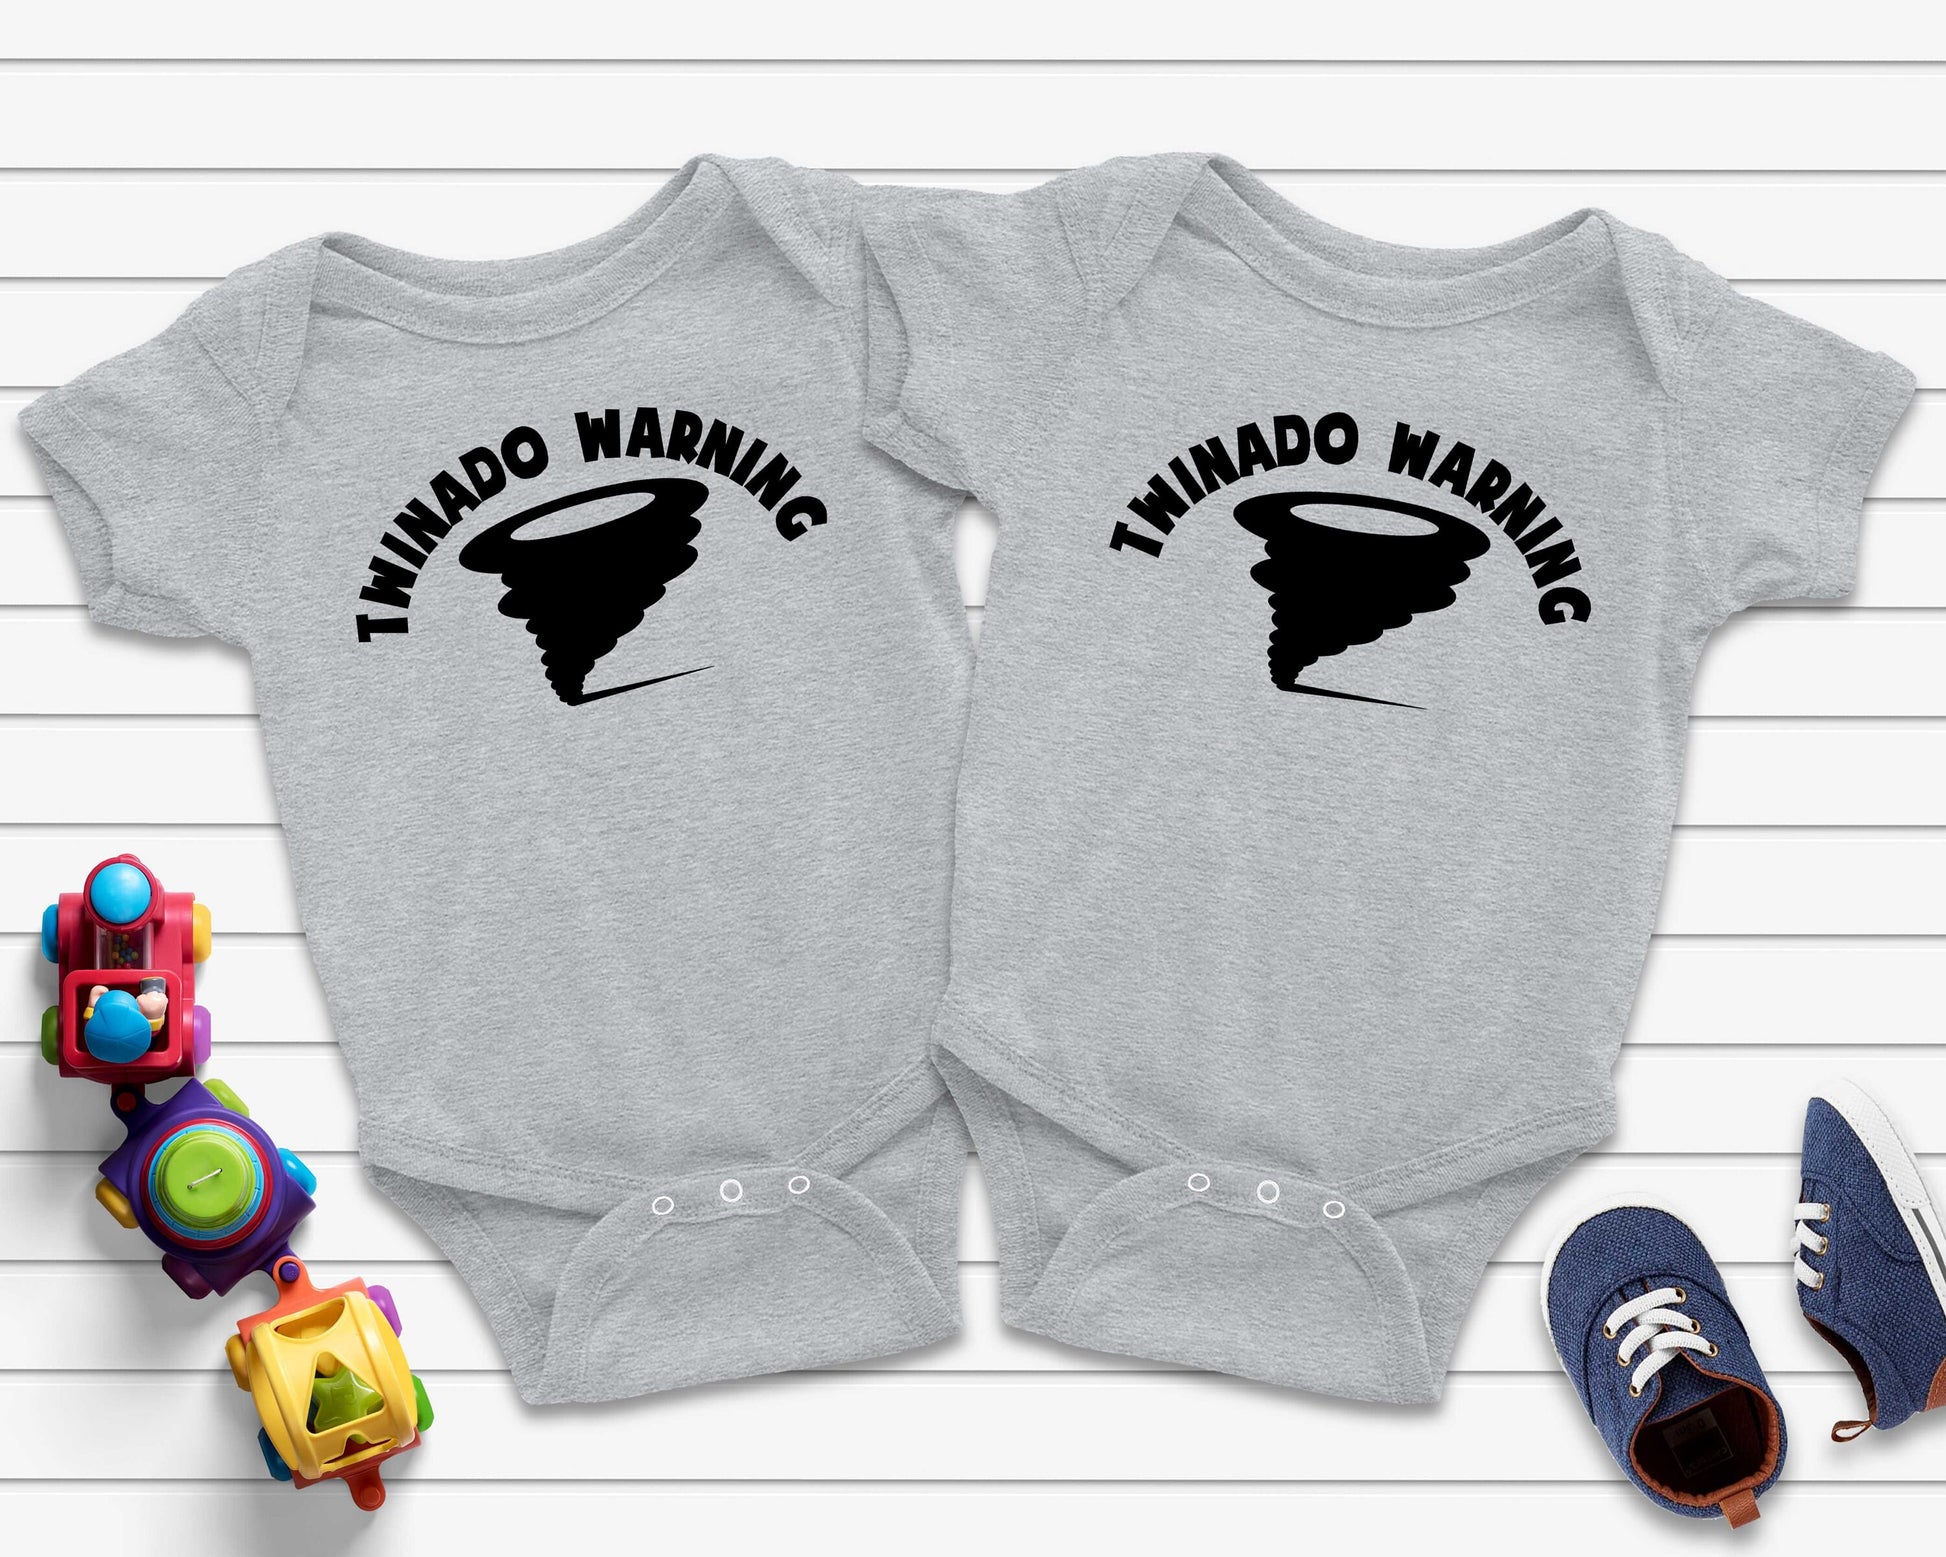 Set of Two Twinado Warning T-Shirts or Bodysuits for Twins - Identical Twins - Twin Tees - Fraternal Twins - Shirts for Twins